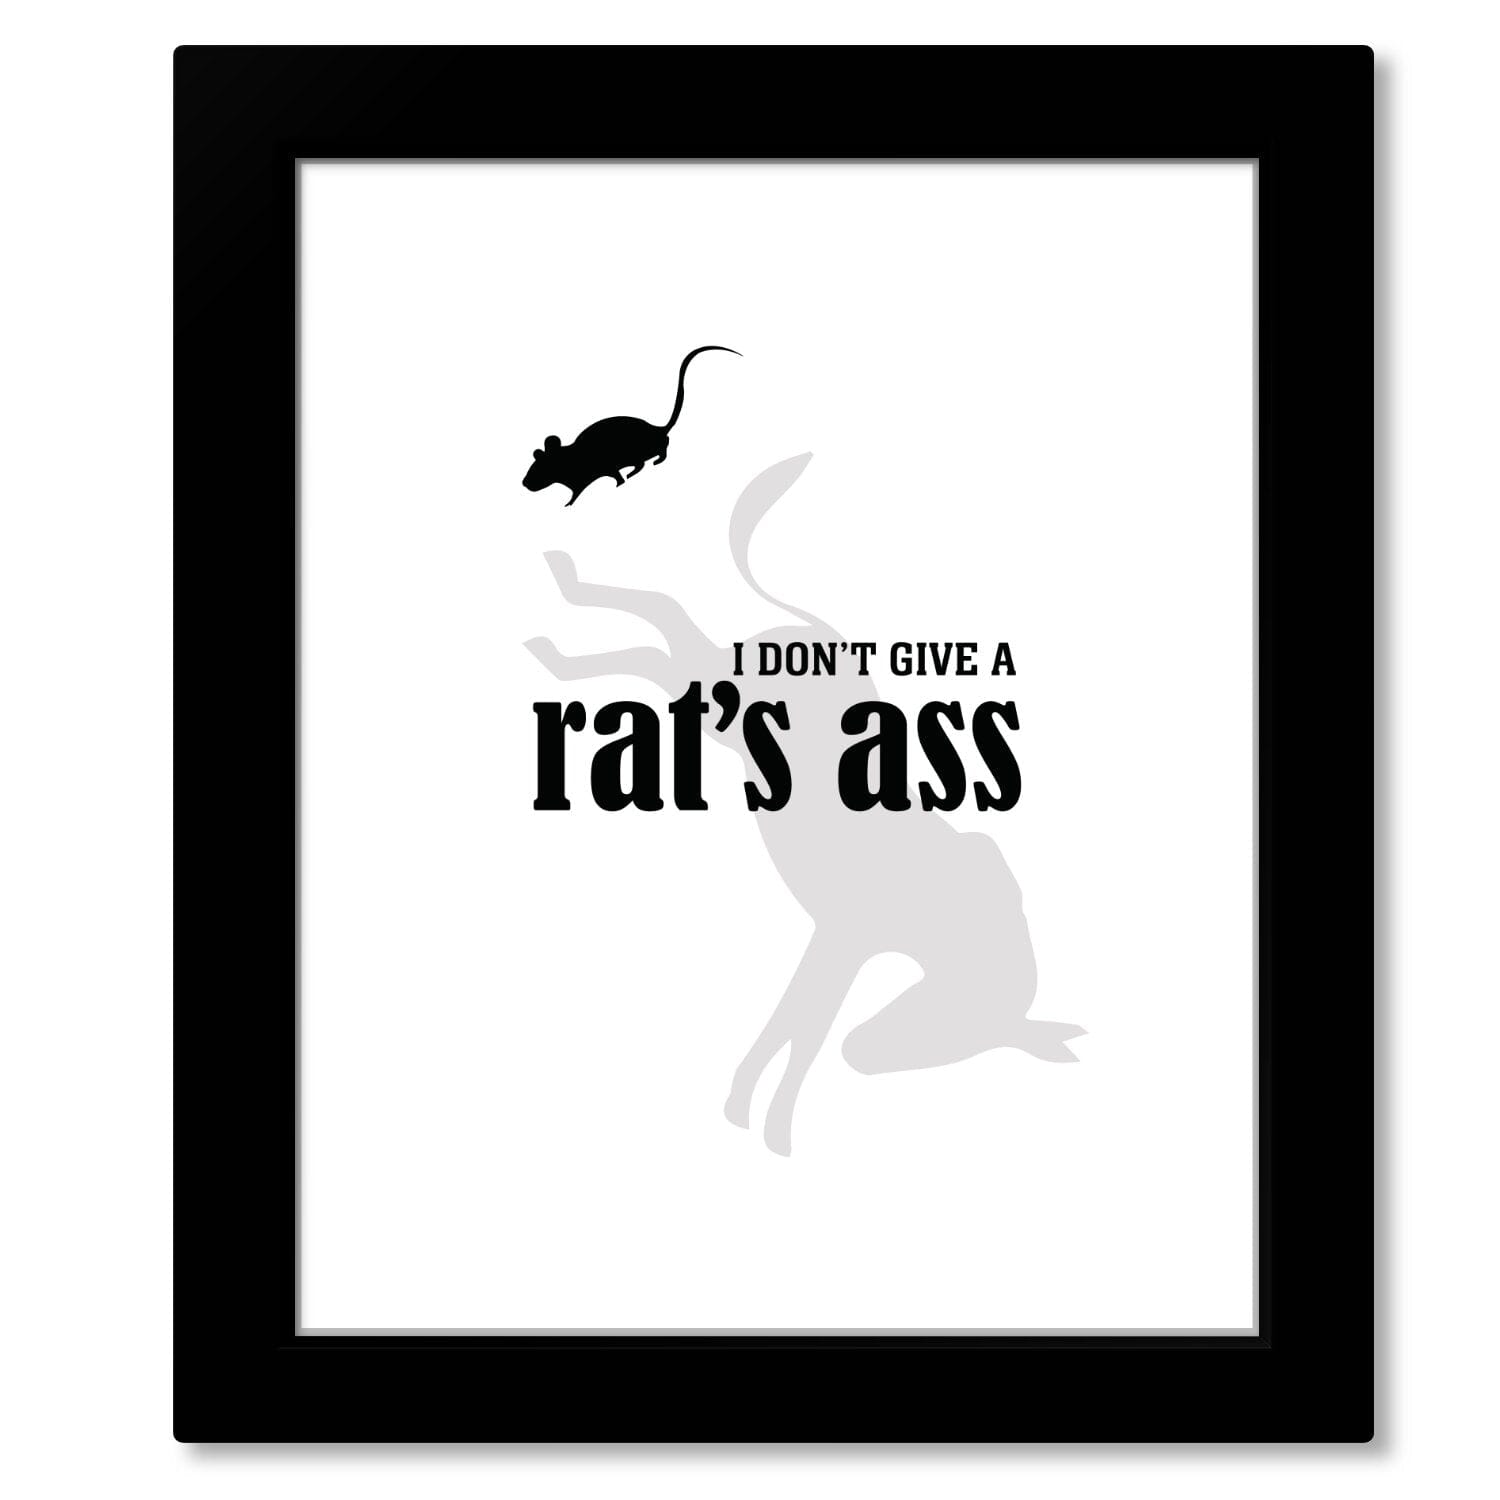 I Don't Give a Rat's Ass - Wise and Witty Sarcastic Print Wise and Wiseass Quotes Song Lyrics Art 8x10 Black Matted Print 